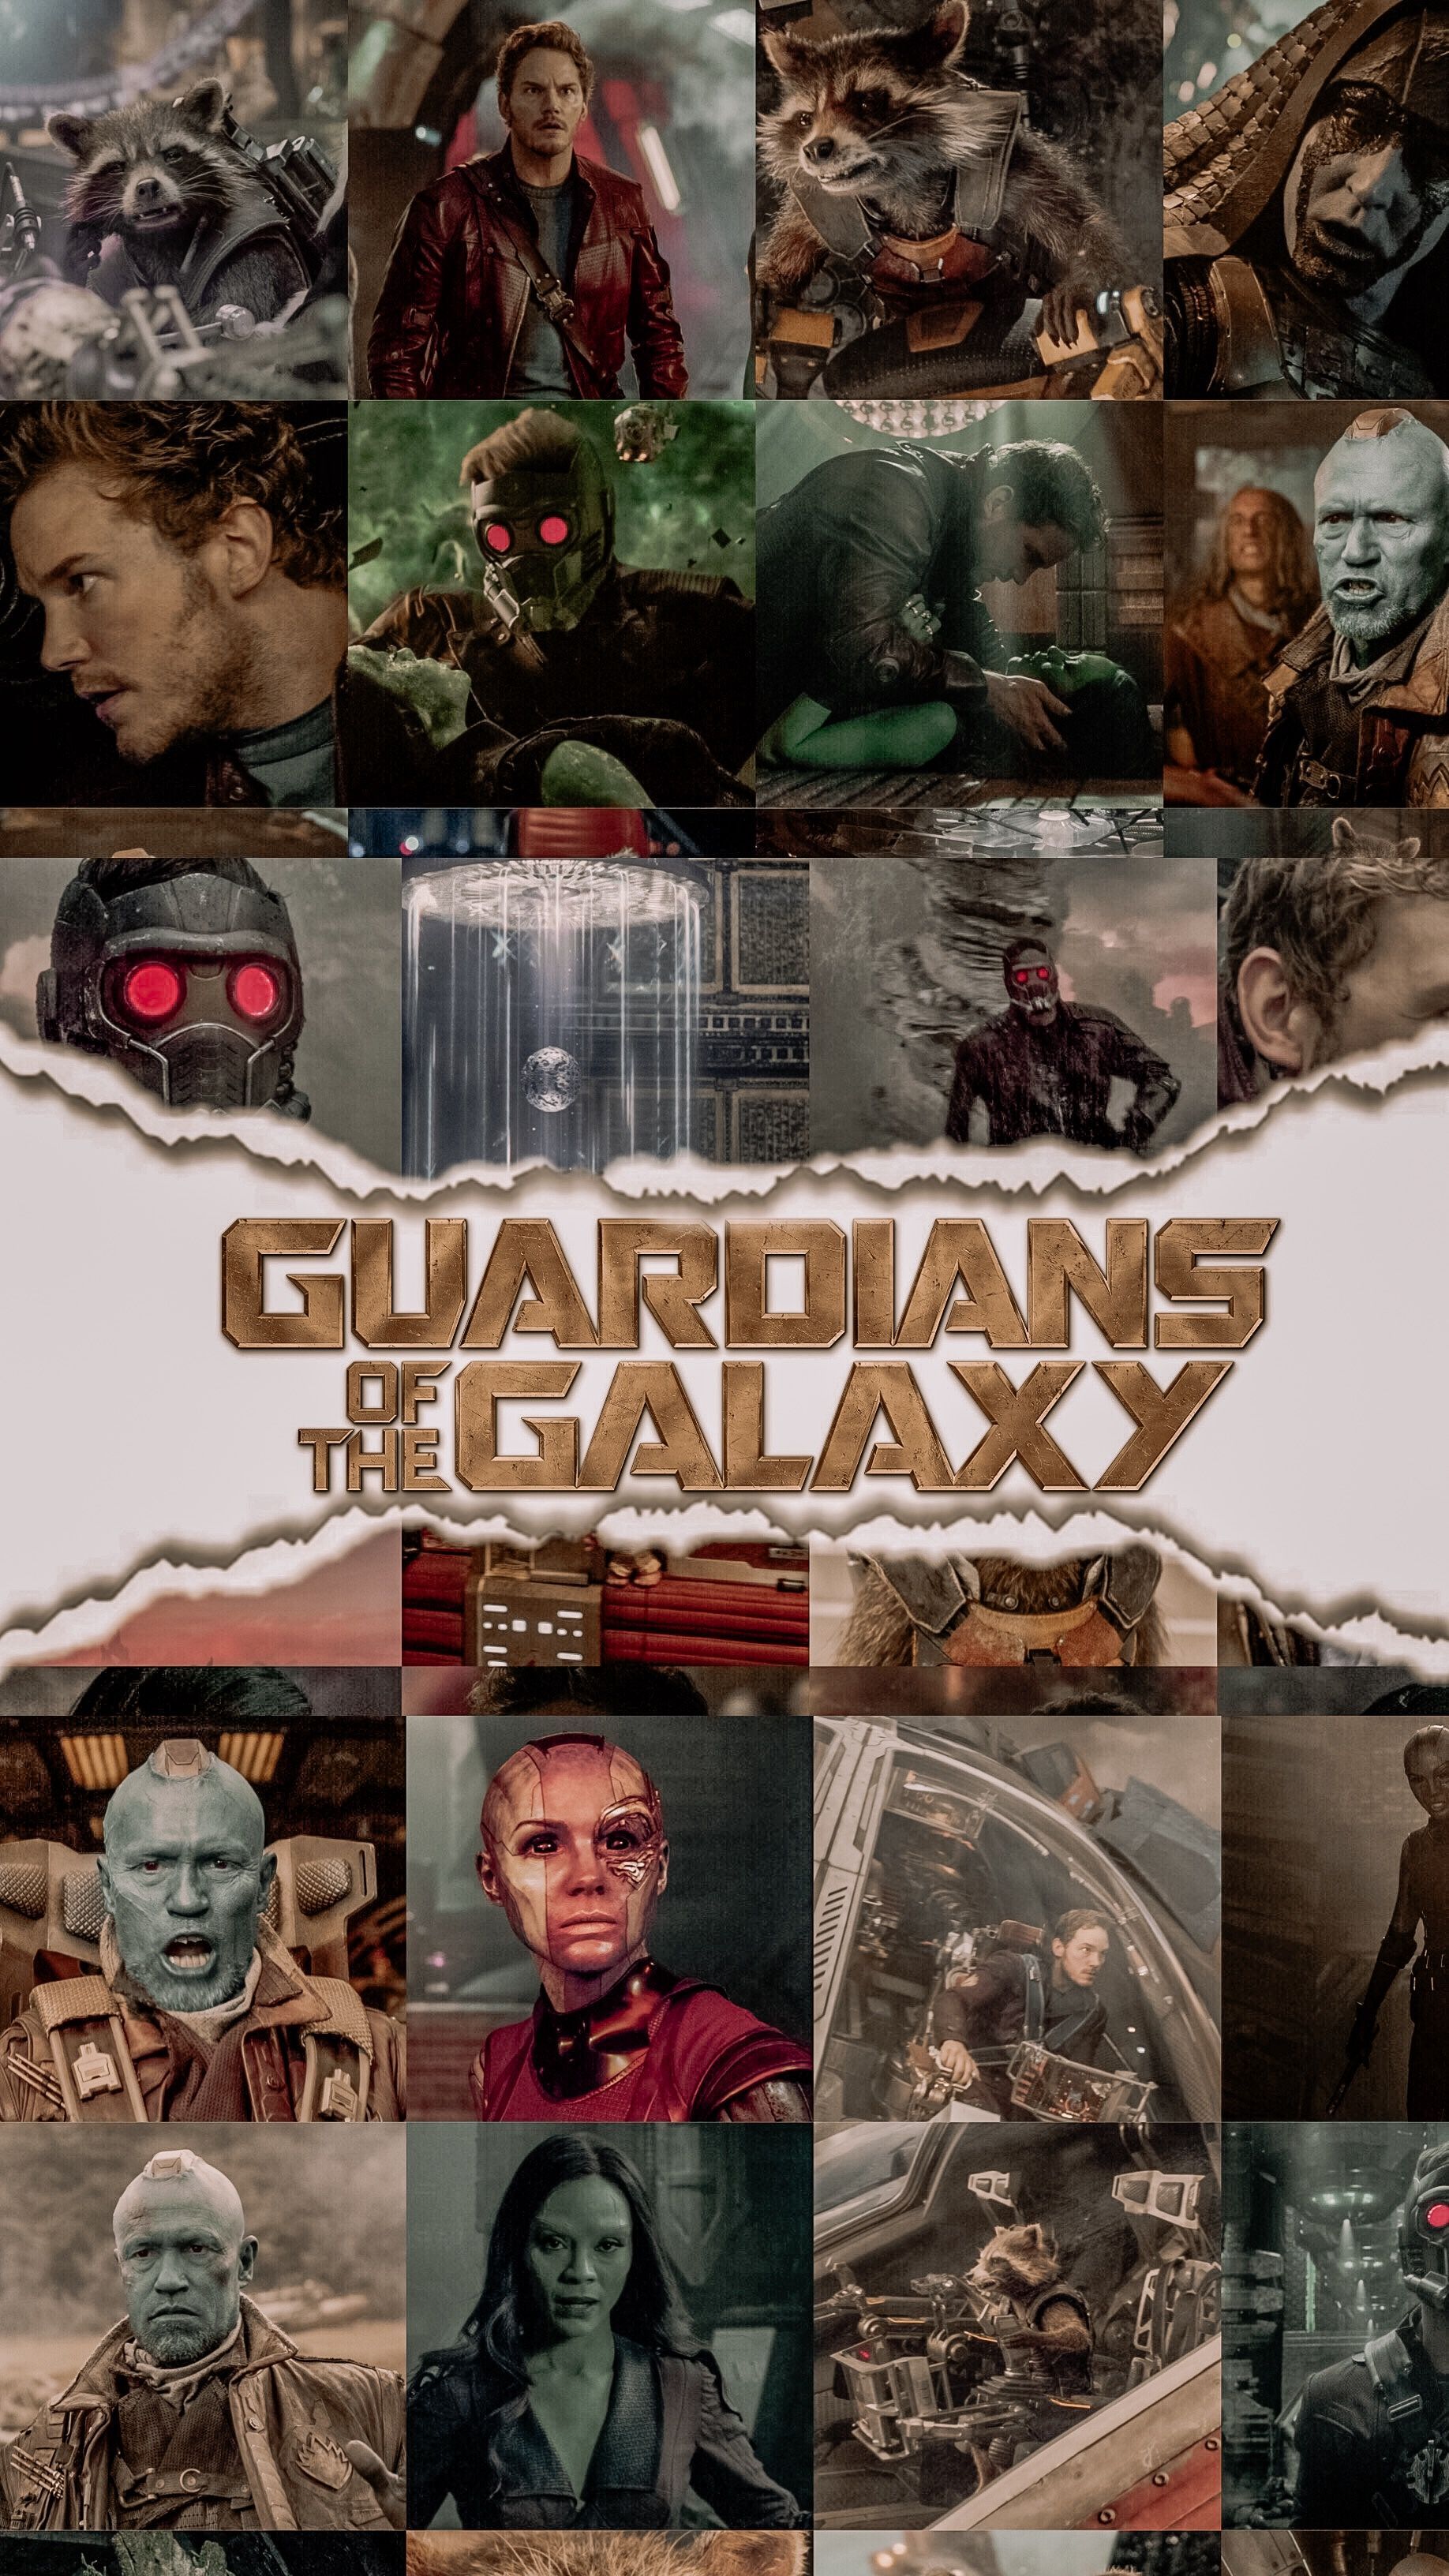 MarvelвЂ™s Guardians of the Galaxy 2021 Wallpapers